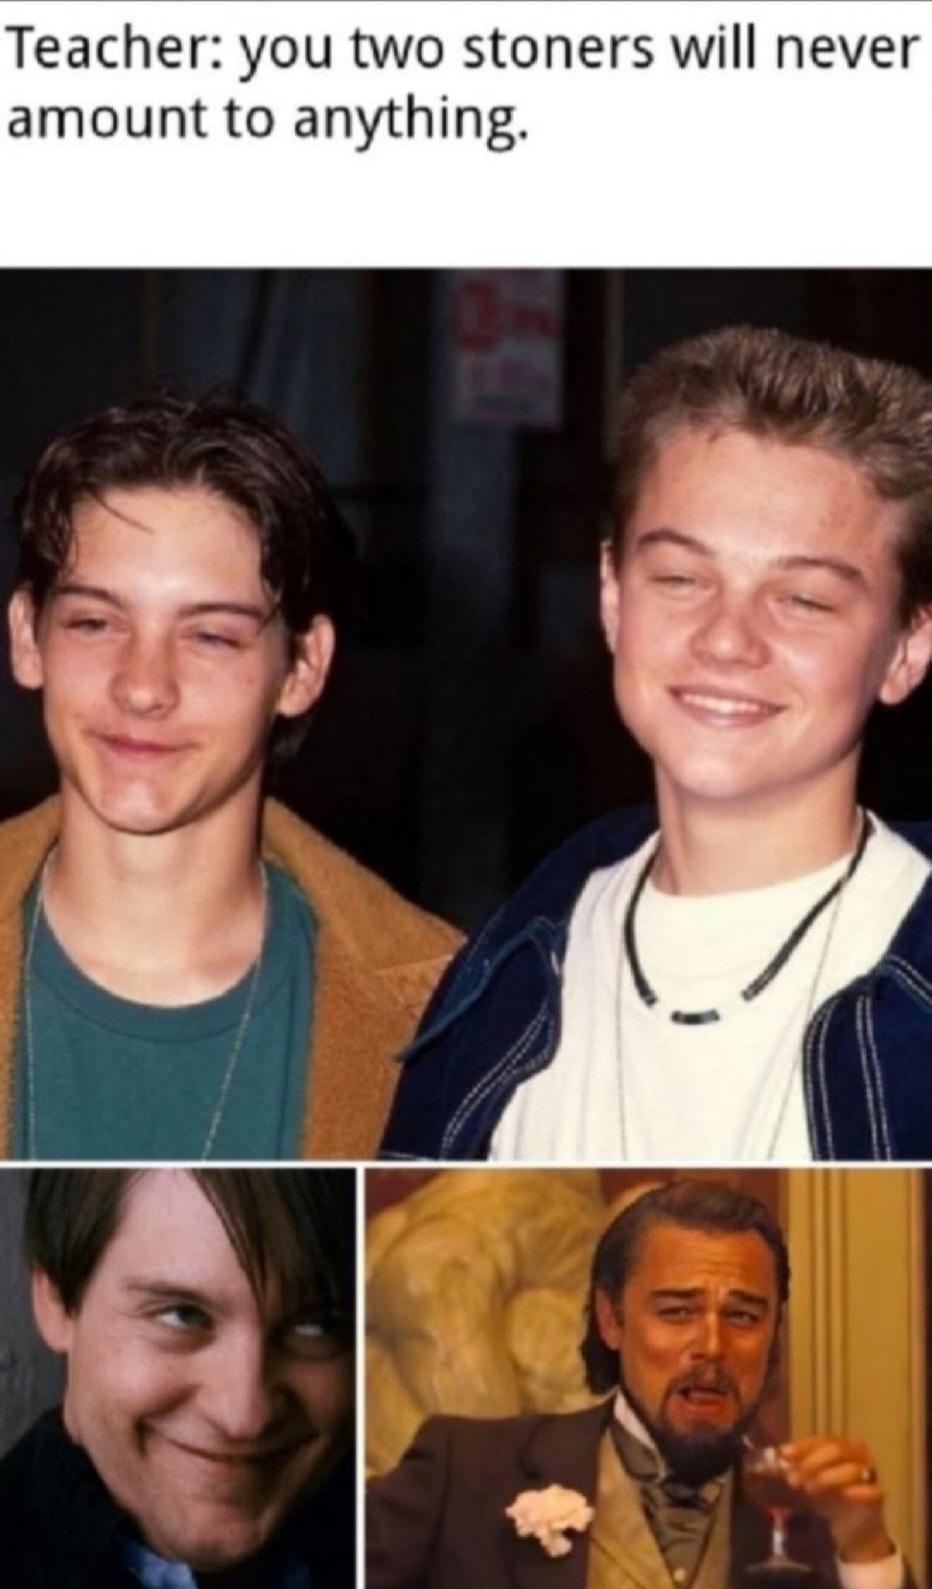 tobey maguire leonardo dicaprio kids - Teacher you two stoners will never amount to anything.